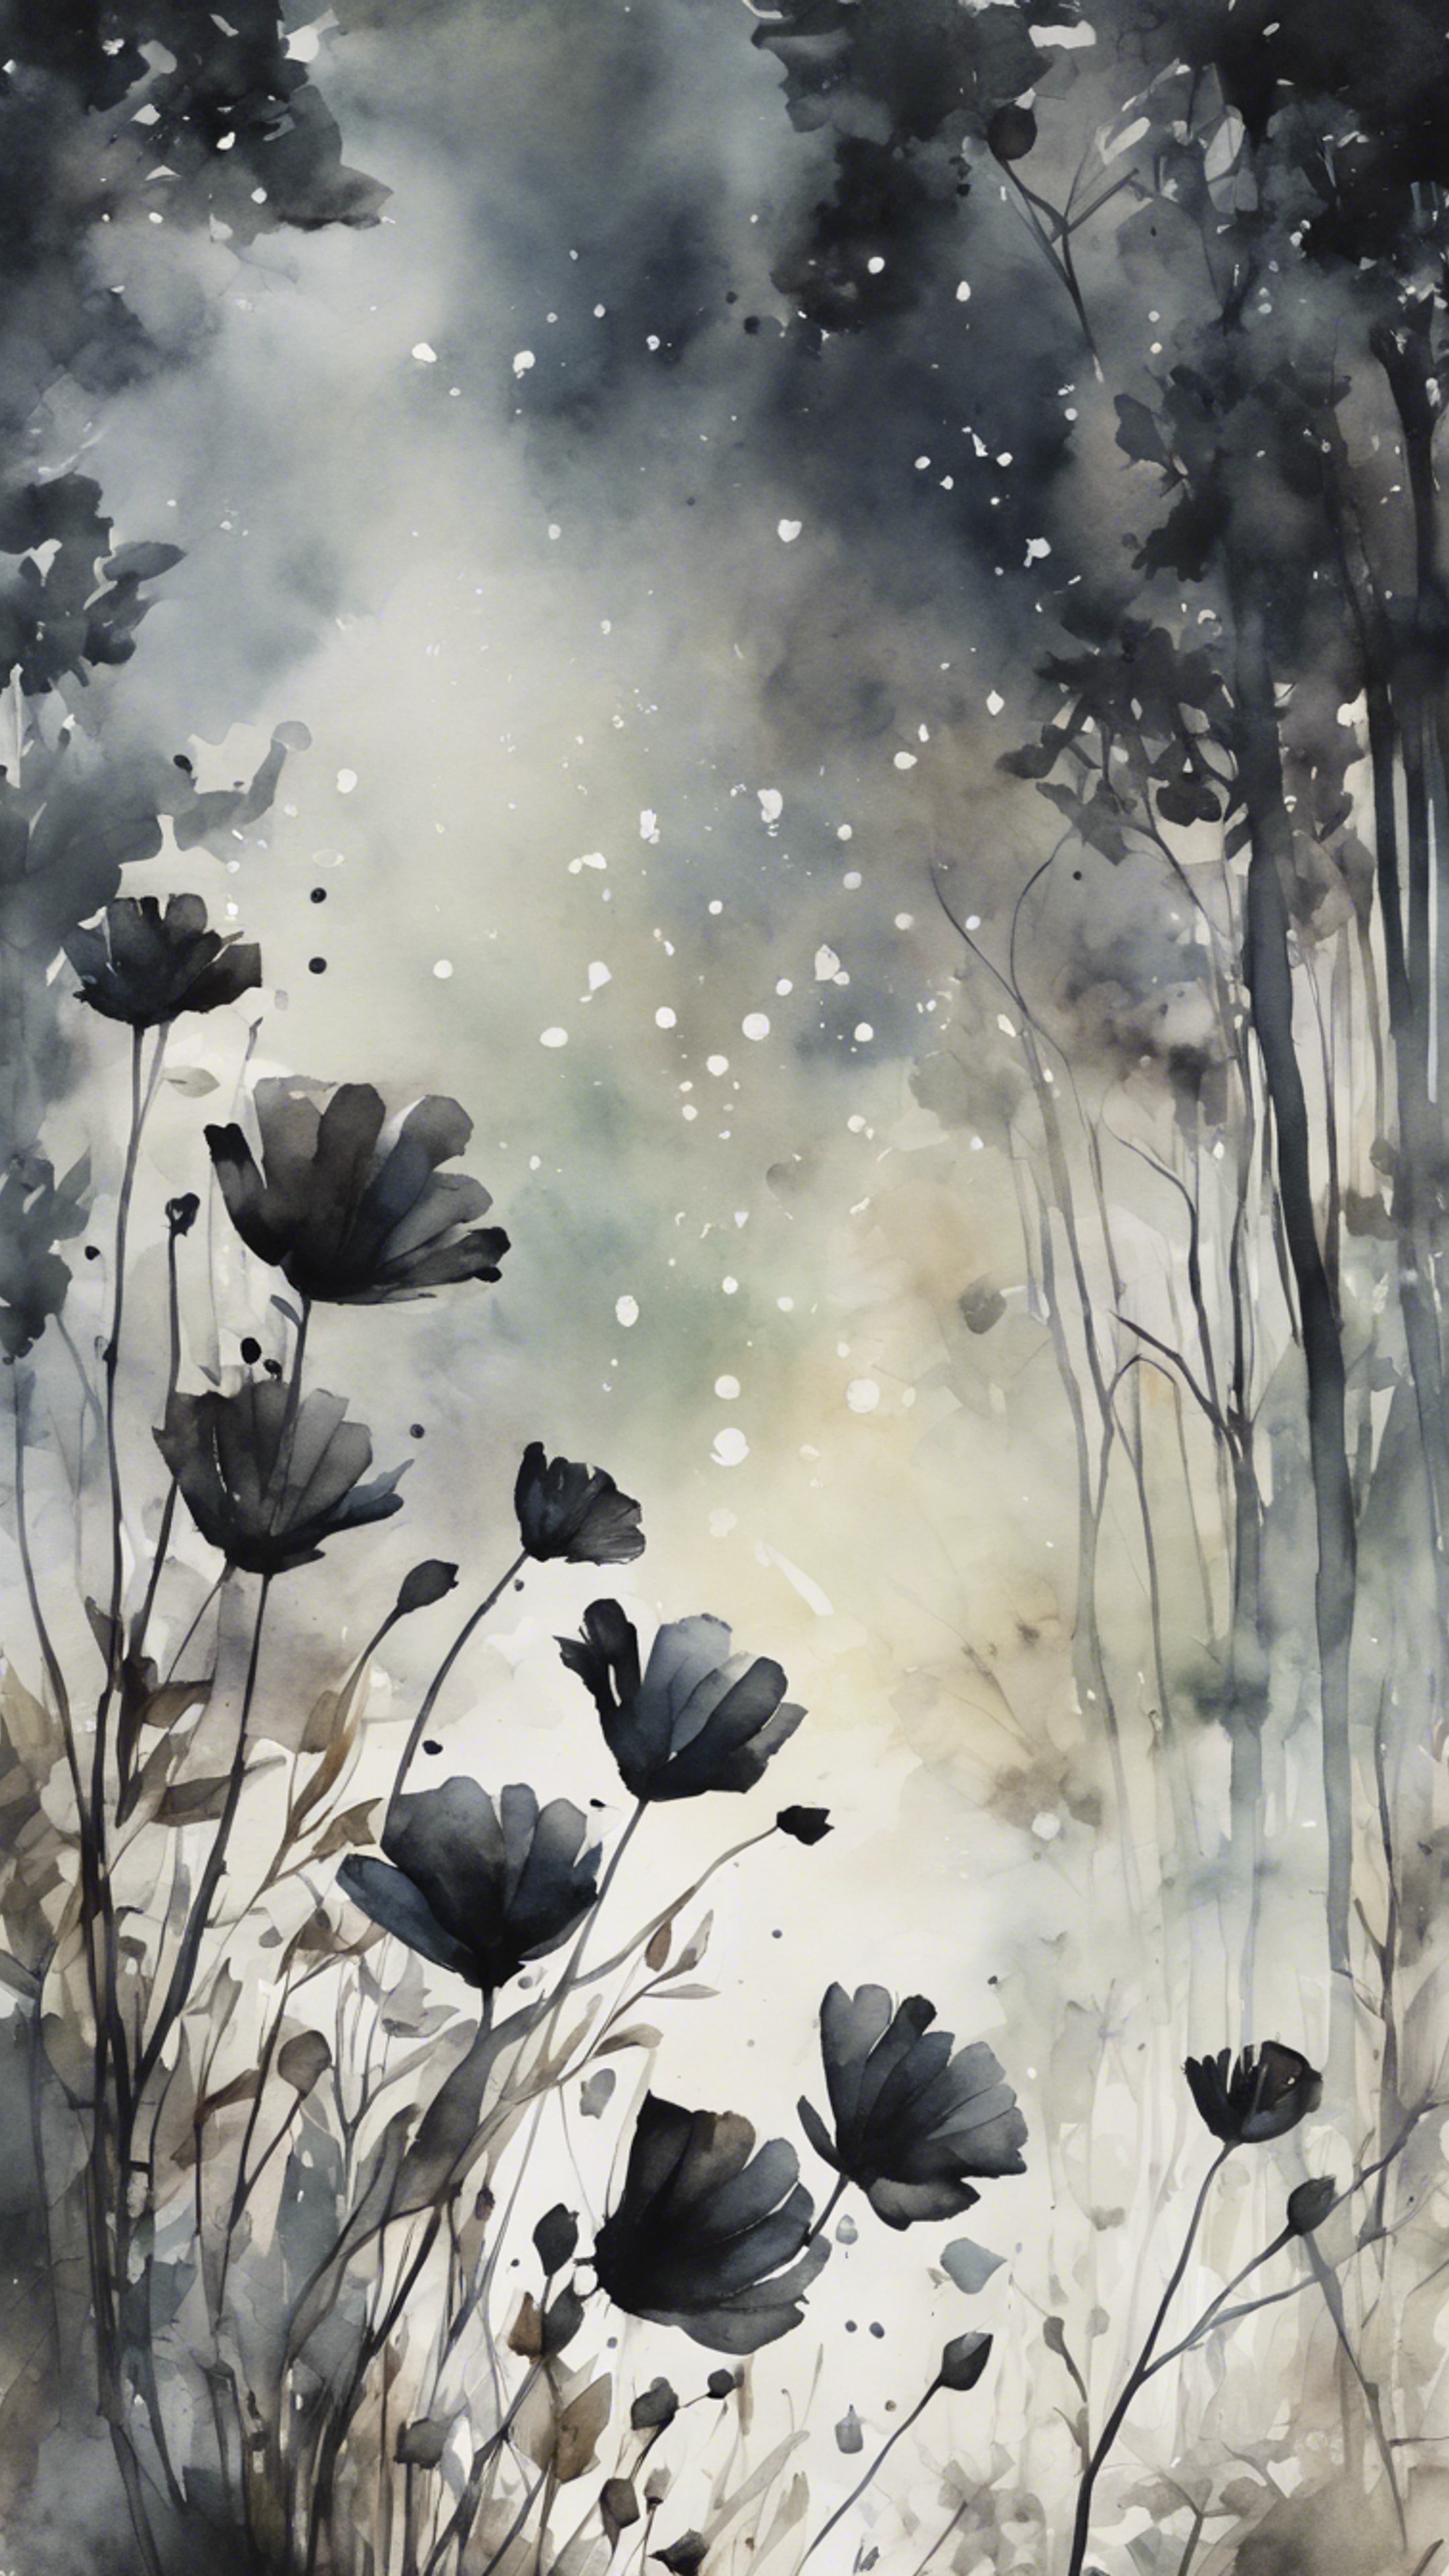 A dreamy watercolor painting depicting black flowers blooming in the heart of a dense forest. Kertas dinding[006f57e6dd8144ebb2db]